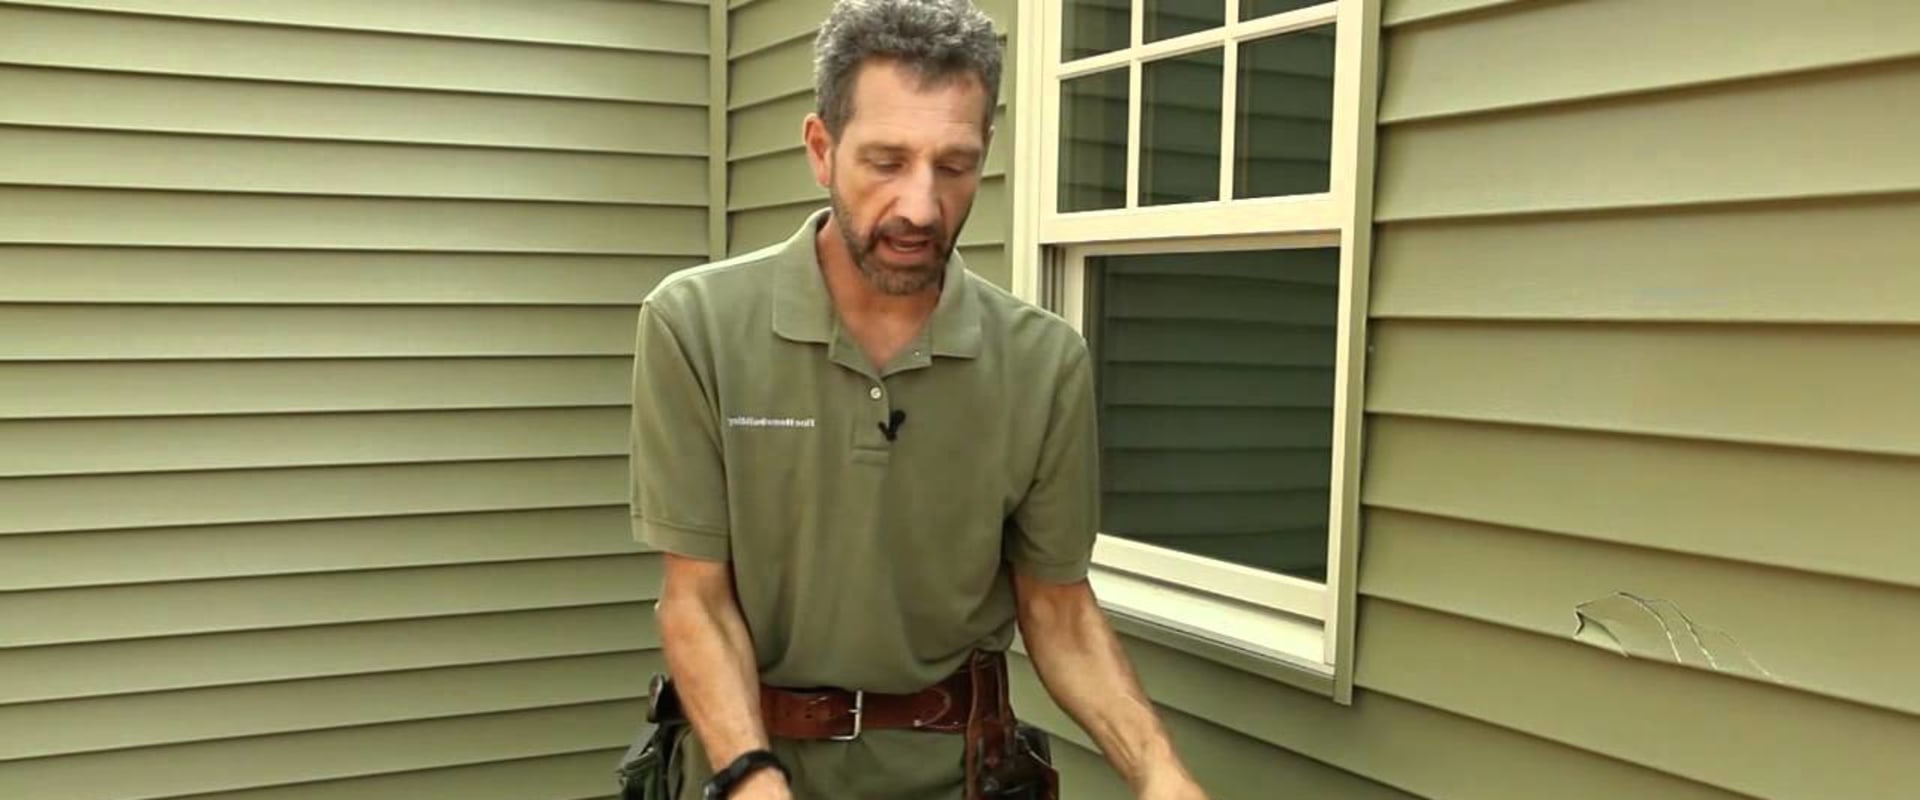 How to Deal with Loose or Missing Siding on Your Home